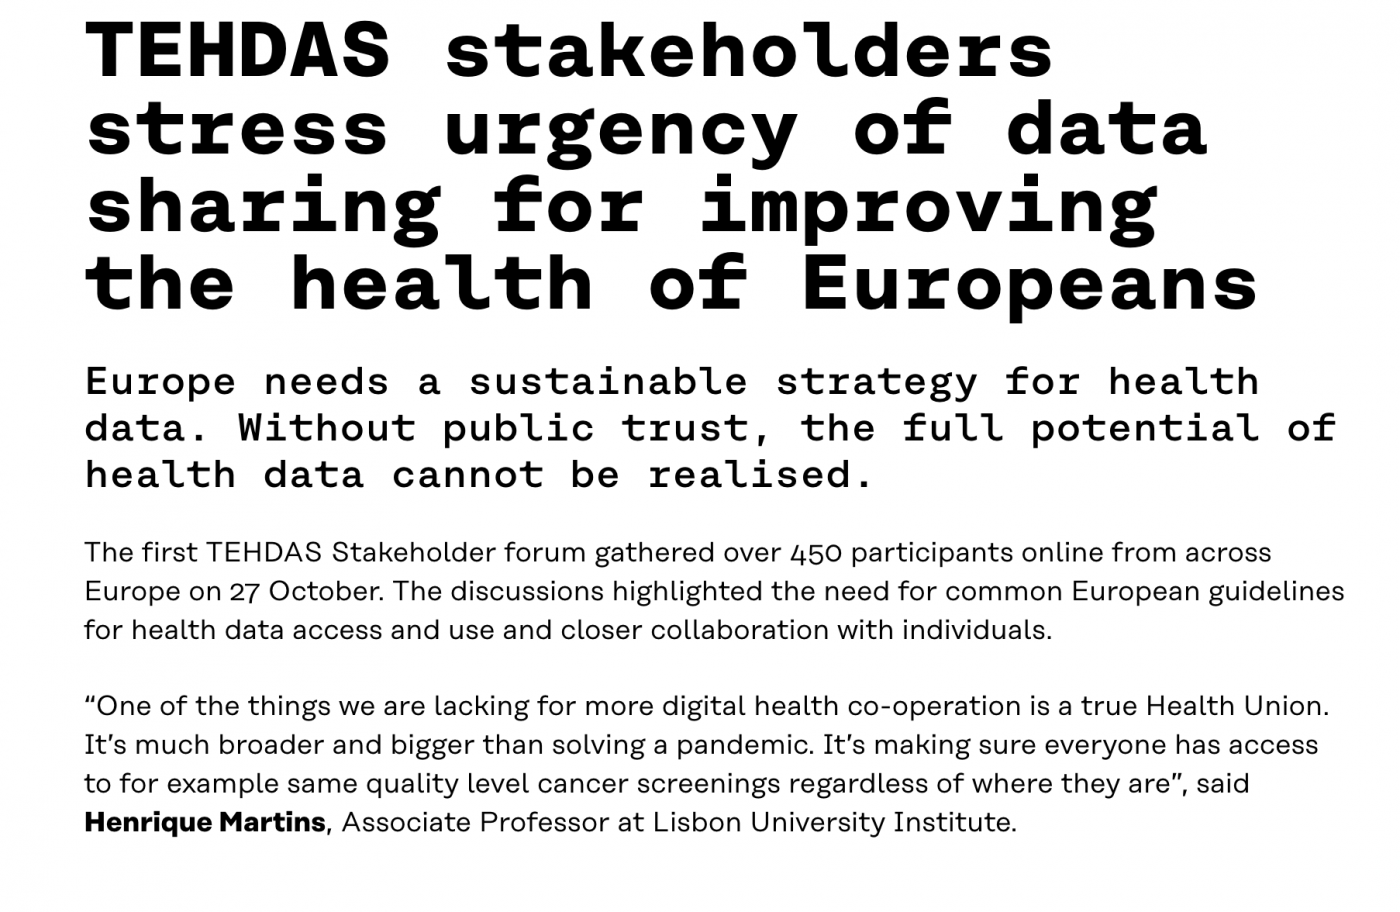 TEHDAS stakeholders stress urgency of data sharing for improving the health of Europeans symbol image